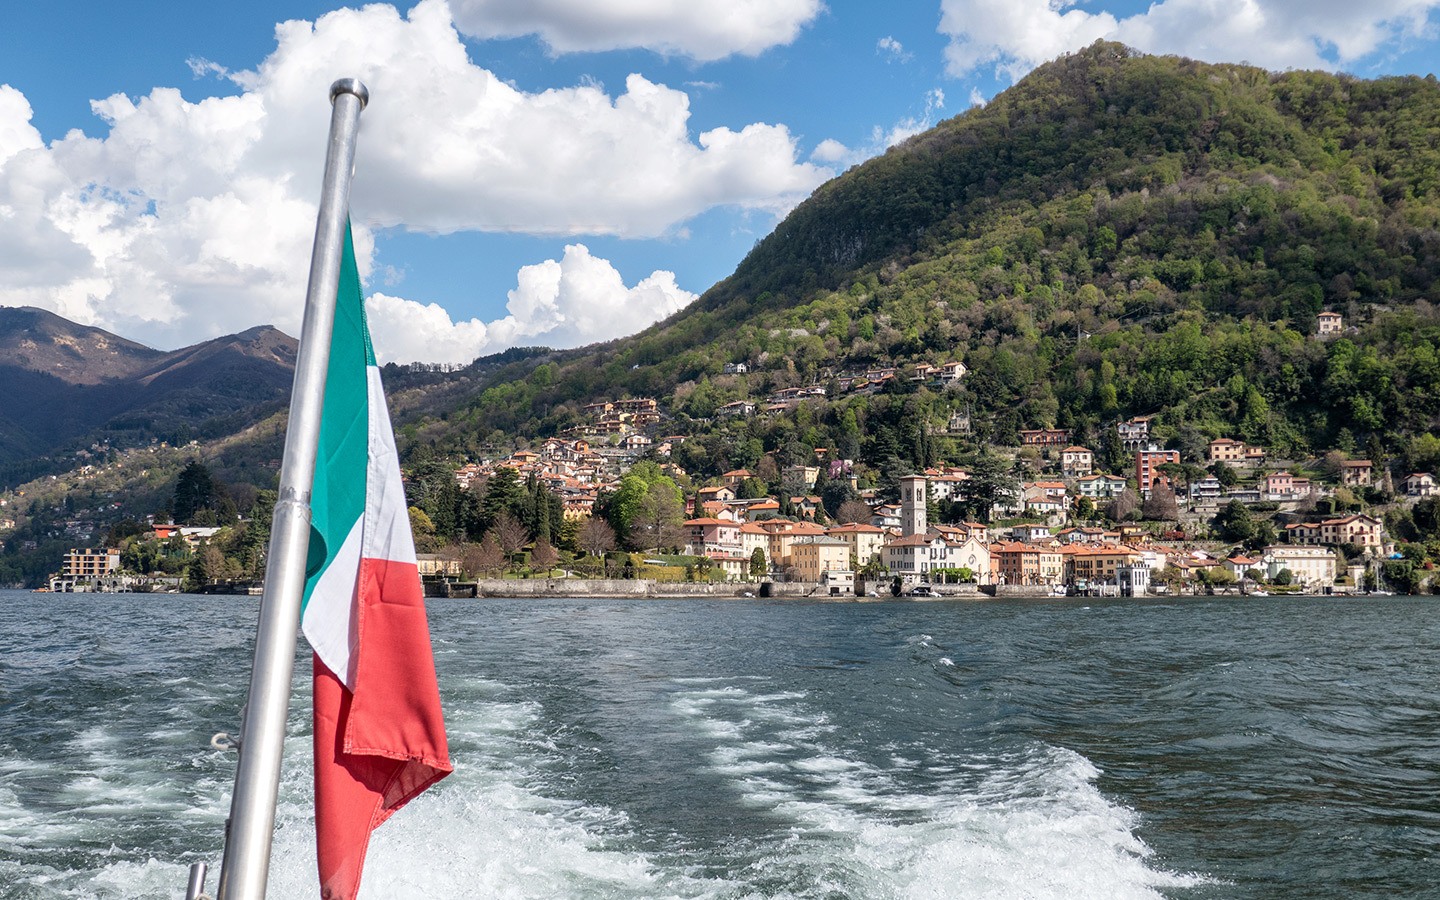 Boat trip on the lake, one of the best things to do in Como